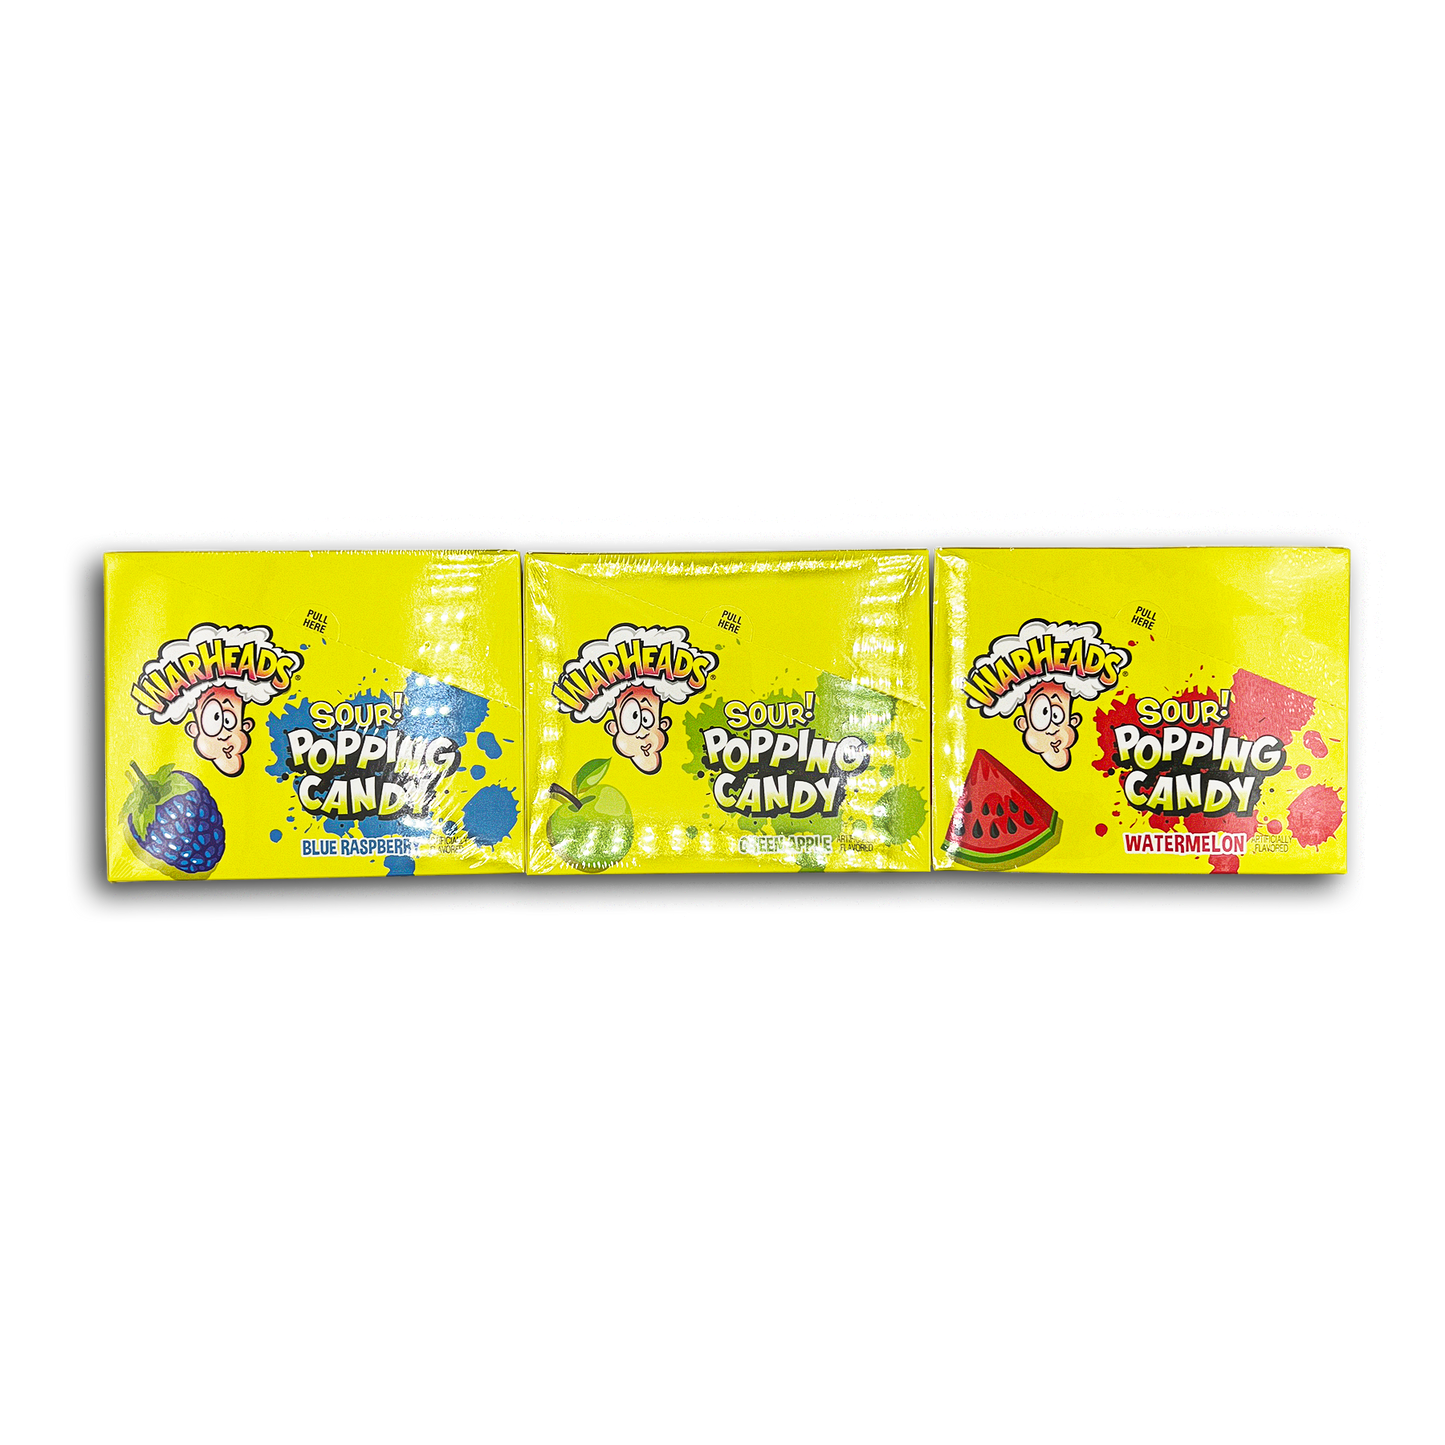 20PK WARHEADS SOUR POPPING CANDY DISPLAY